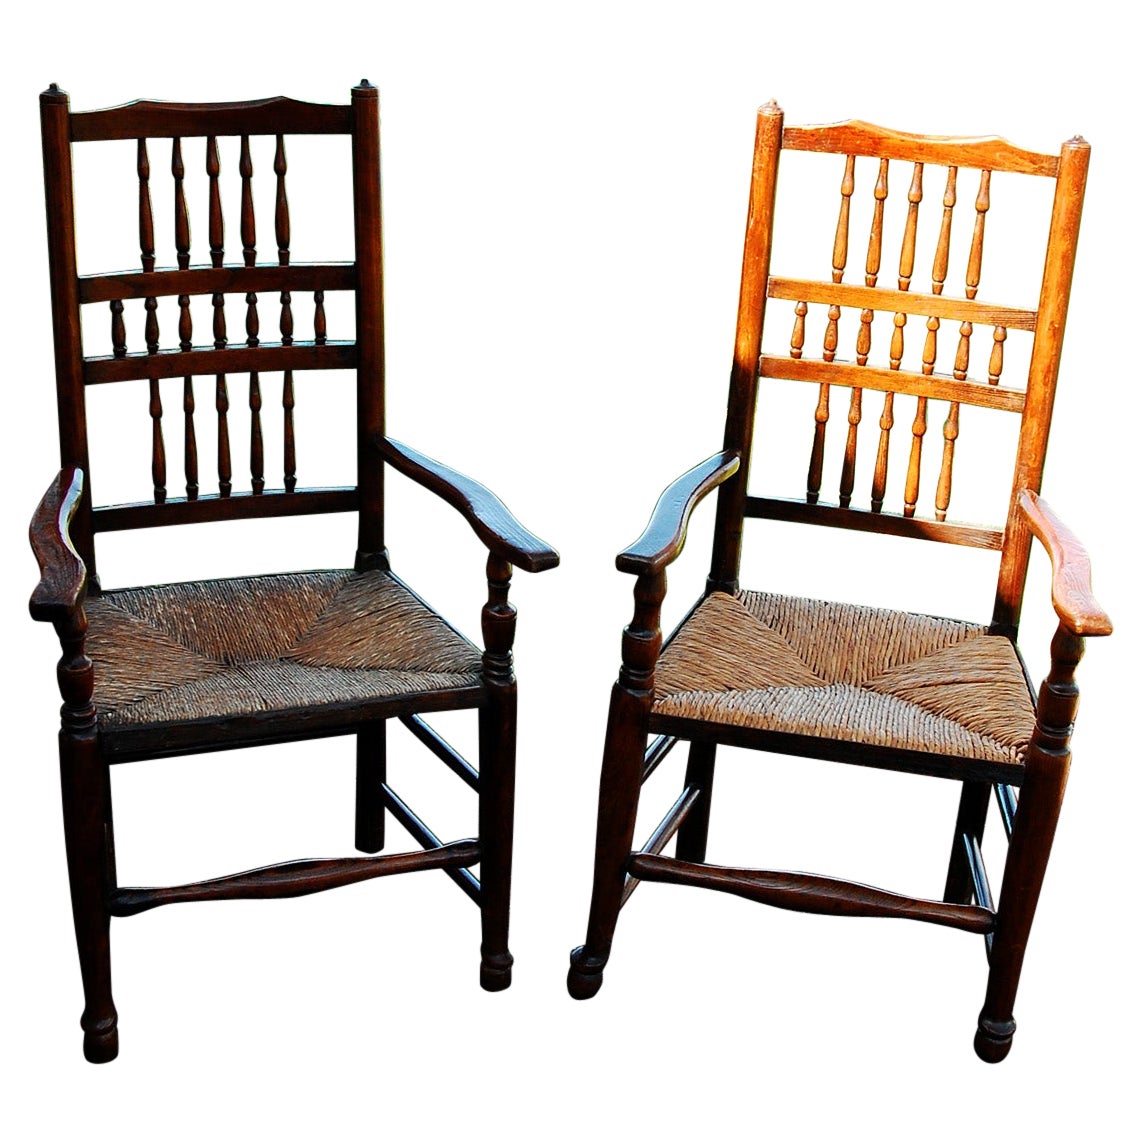 English Early 19th Century Matched Pair of Spindleback Armchairs in Elm For Sale